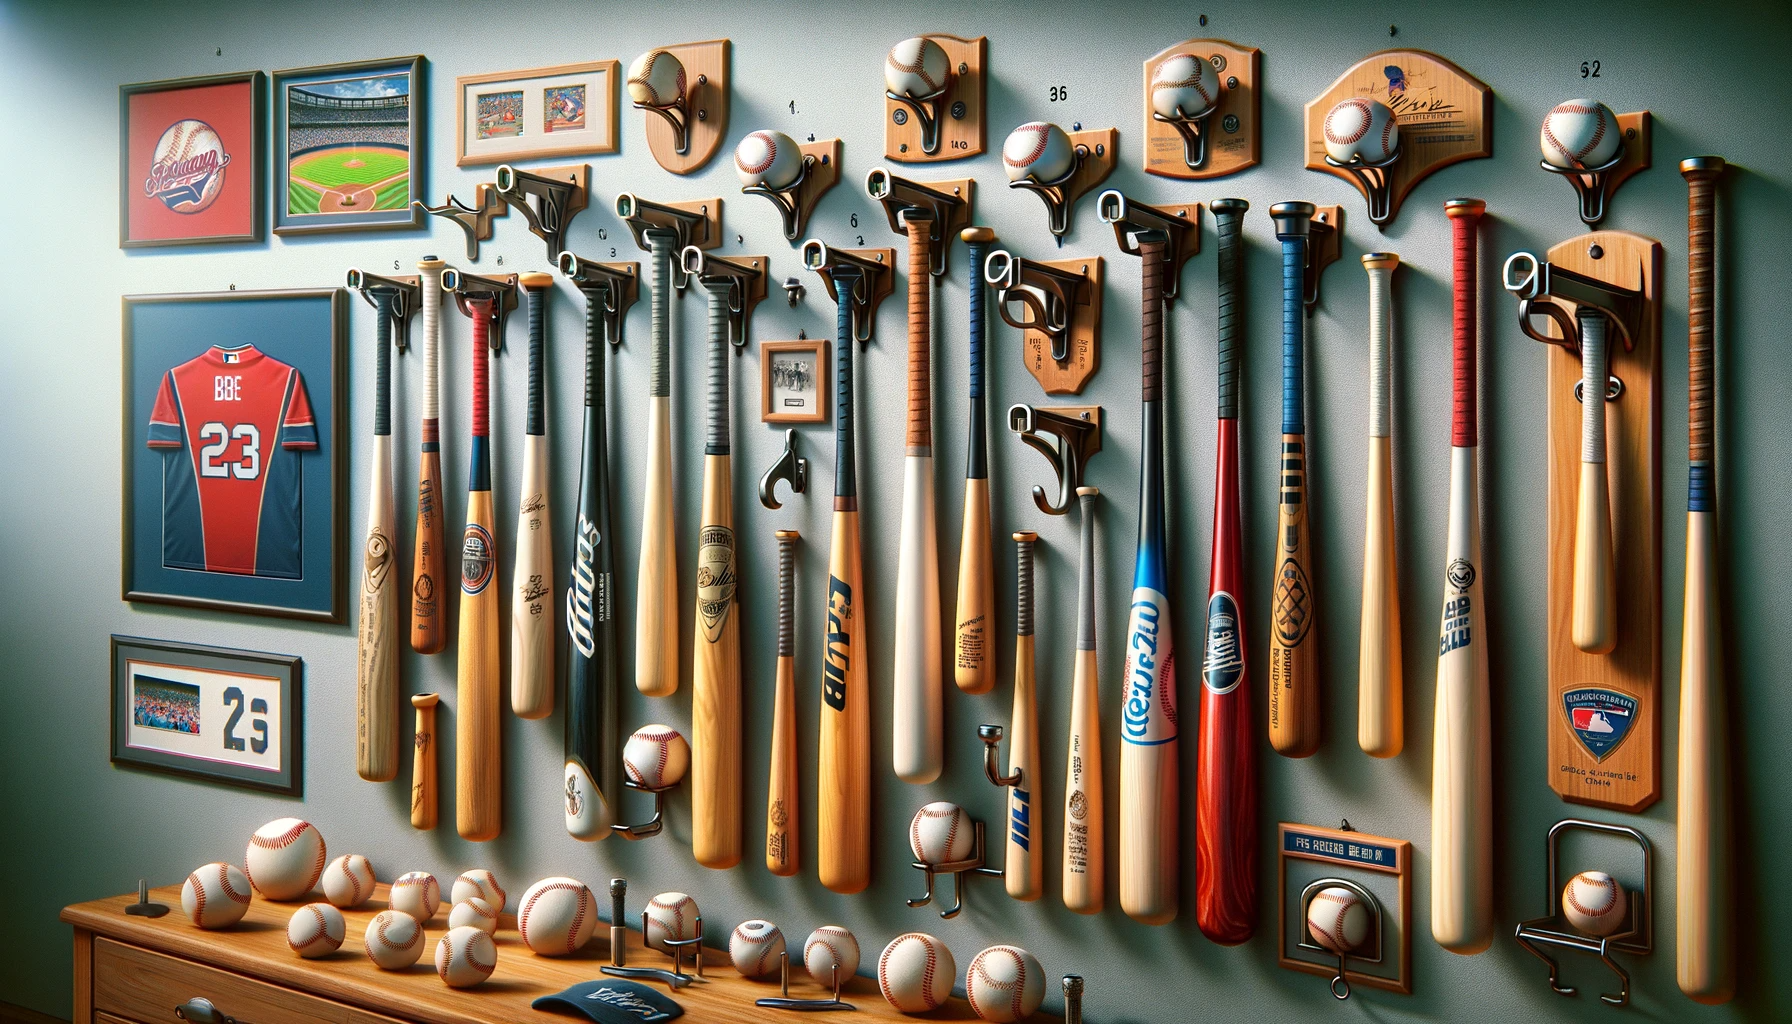 How to Hang Baseball Bats on Wall? A Step-by-Step Guide!